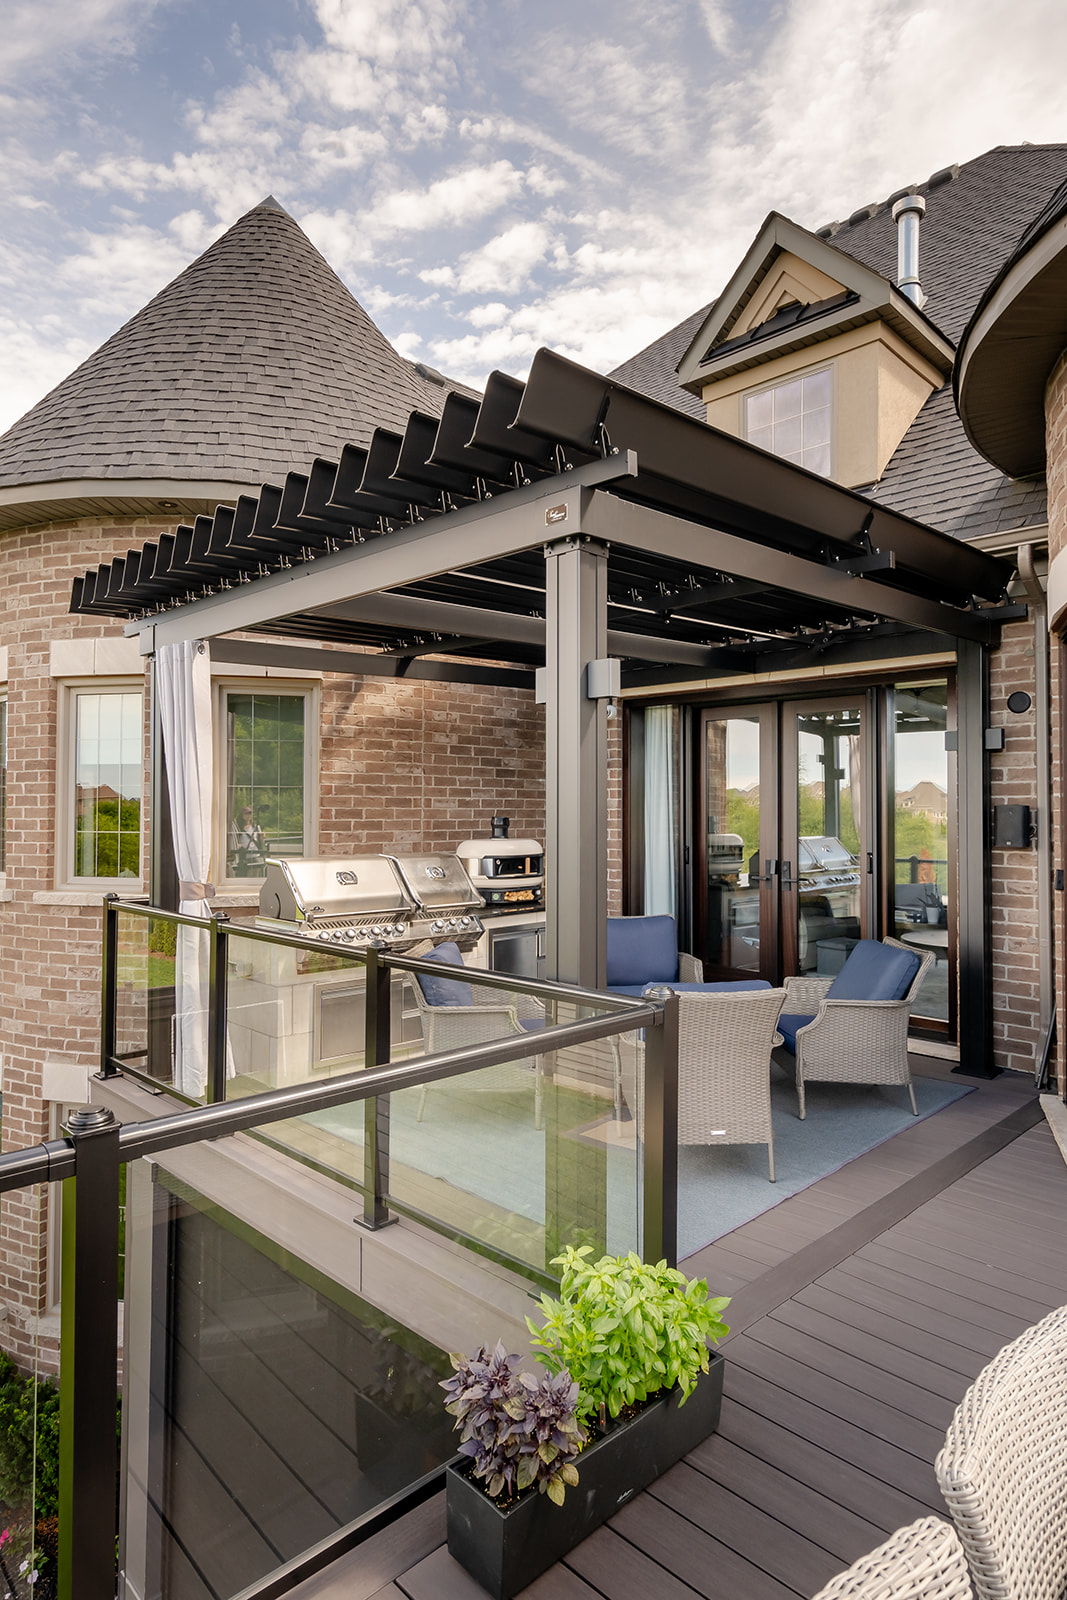 An outdoor patio set on the deck with a gazebo overtop.